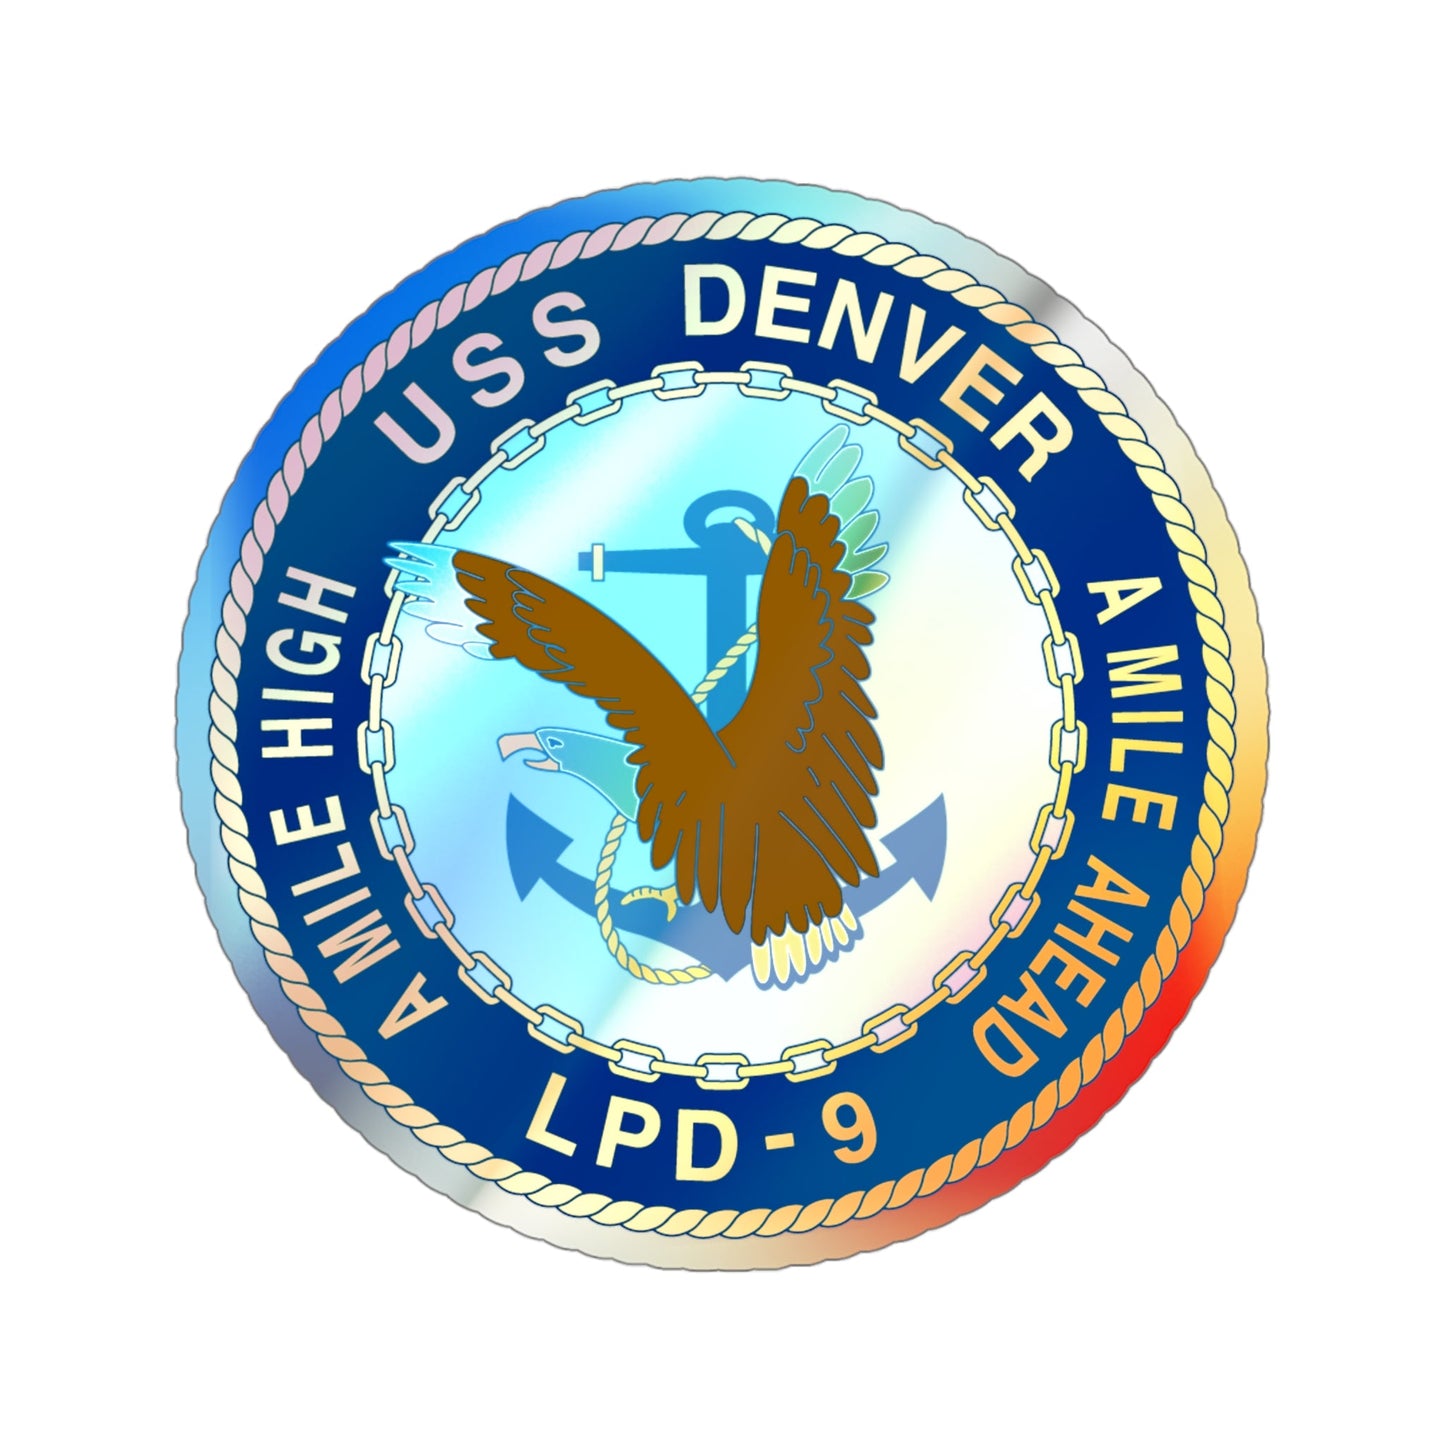 A Mile High USS Denver A Mile Ahead LPD 9 (U.S. Navy) Holographic STICKER Die-Cut Vinyl Decal-4 Inch-The Sticker Space